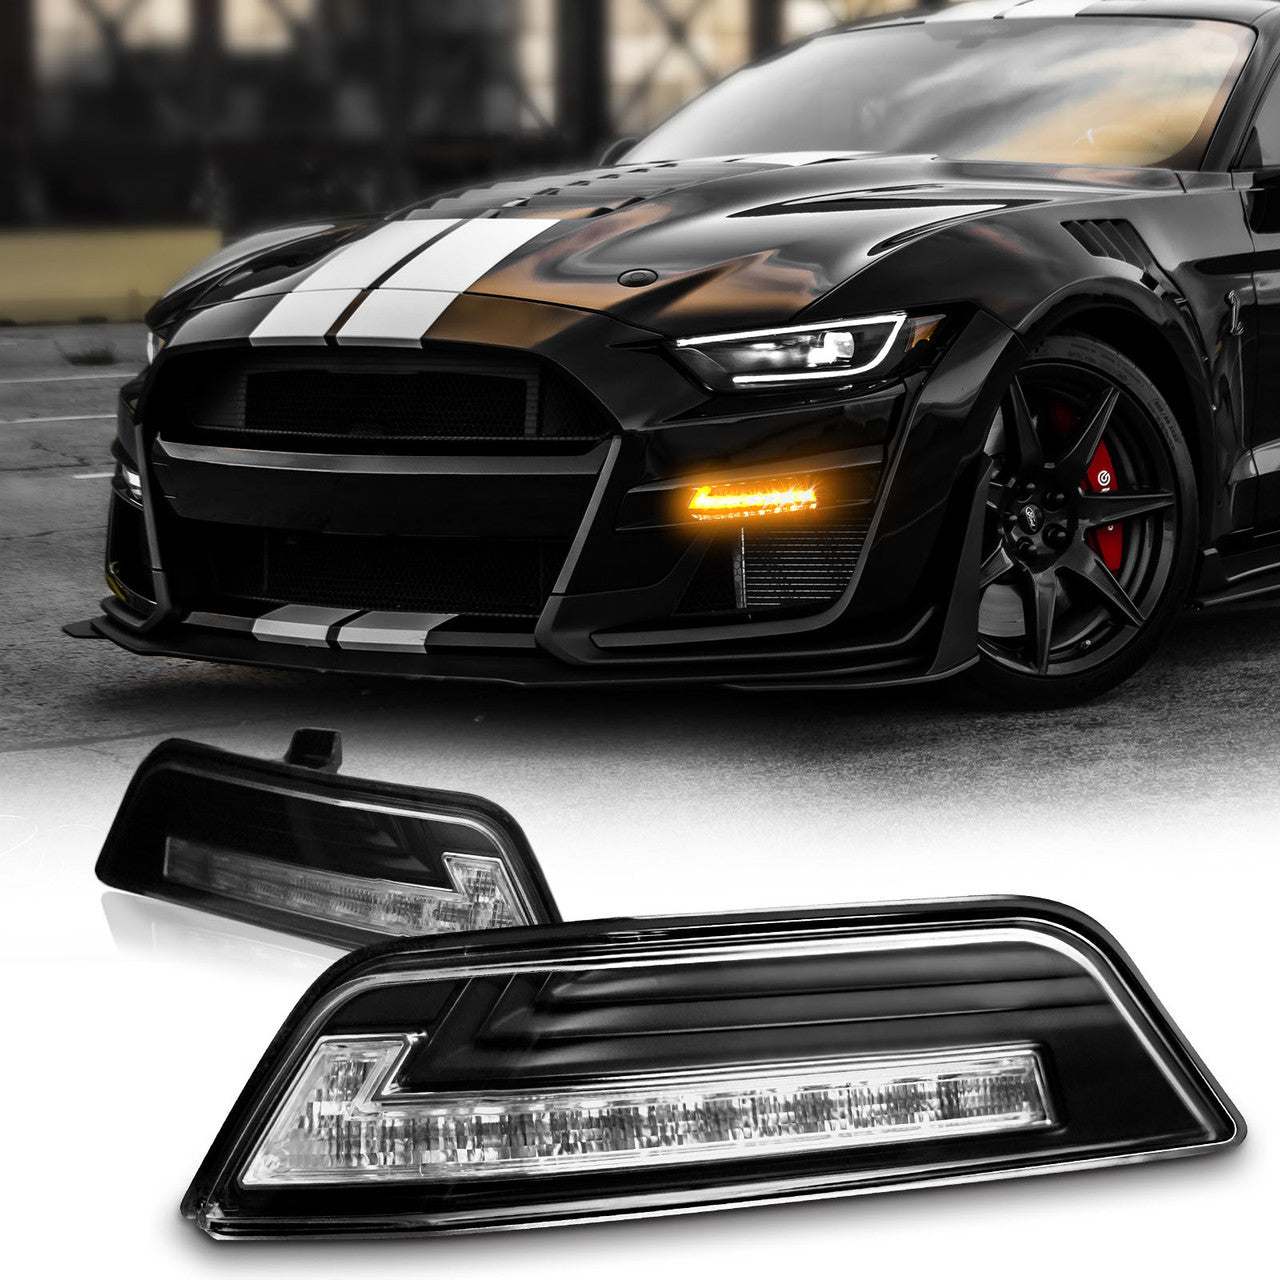 2015-17 Mustang Front Turn Signal Tint Kit (Non-Shelby GT350R/GT 350) —  Luxe Auto Concepts